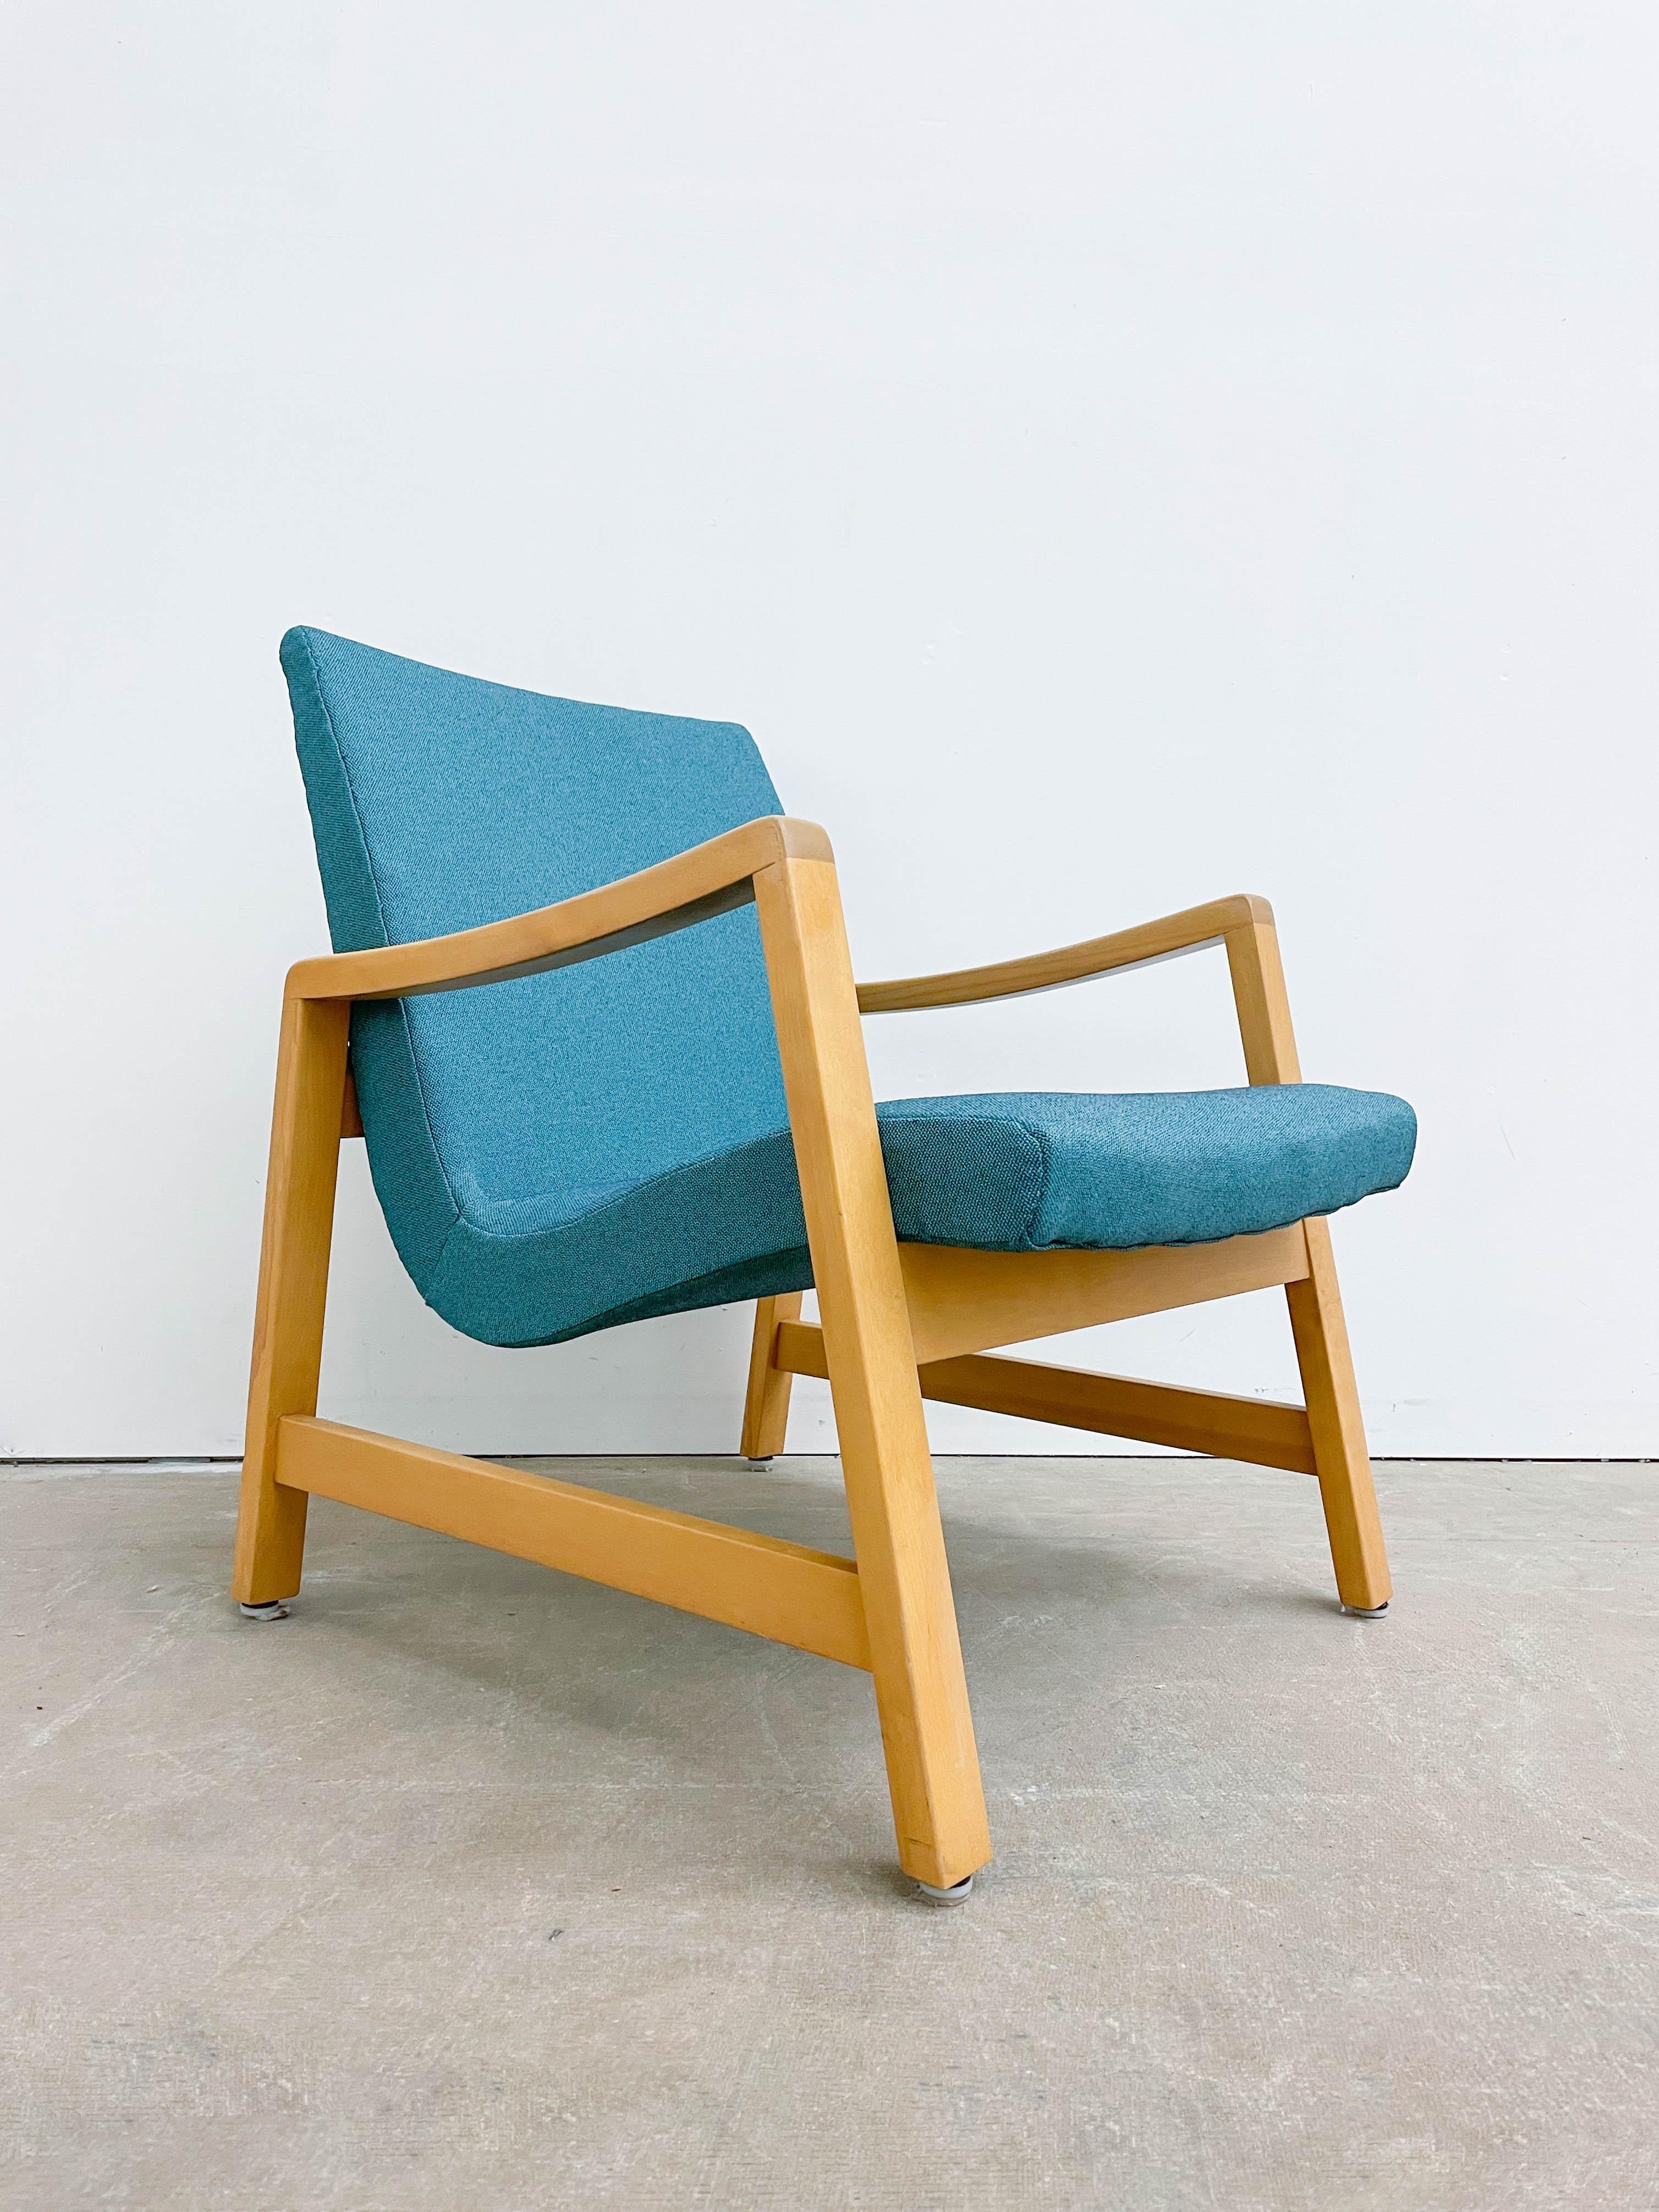 This is a beautiful upholstered armchair designed by Jens Risom for HG Knoll & Associates in the 1940s. It is one of the early, iconic chairs that ushered in a period of incredible mid-century modern design. The solid Birch frame cradles a foam